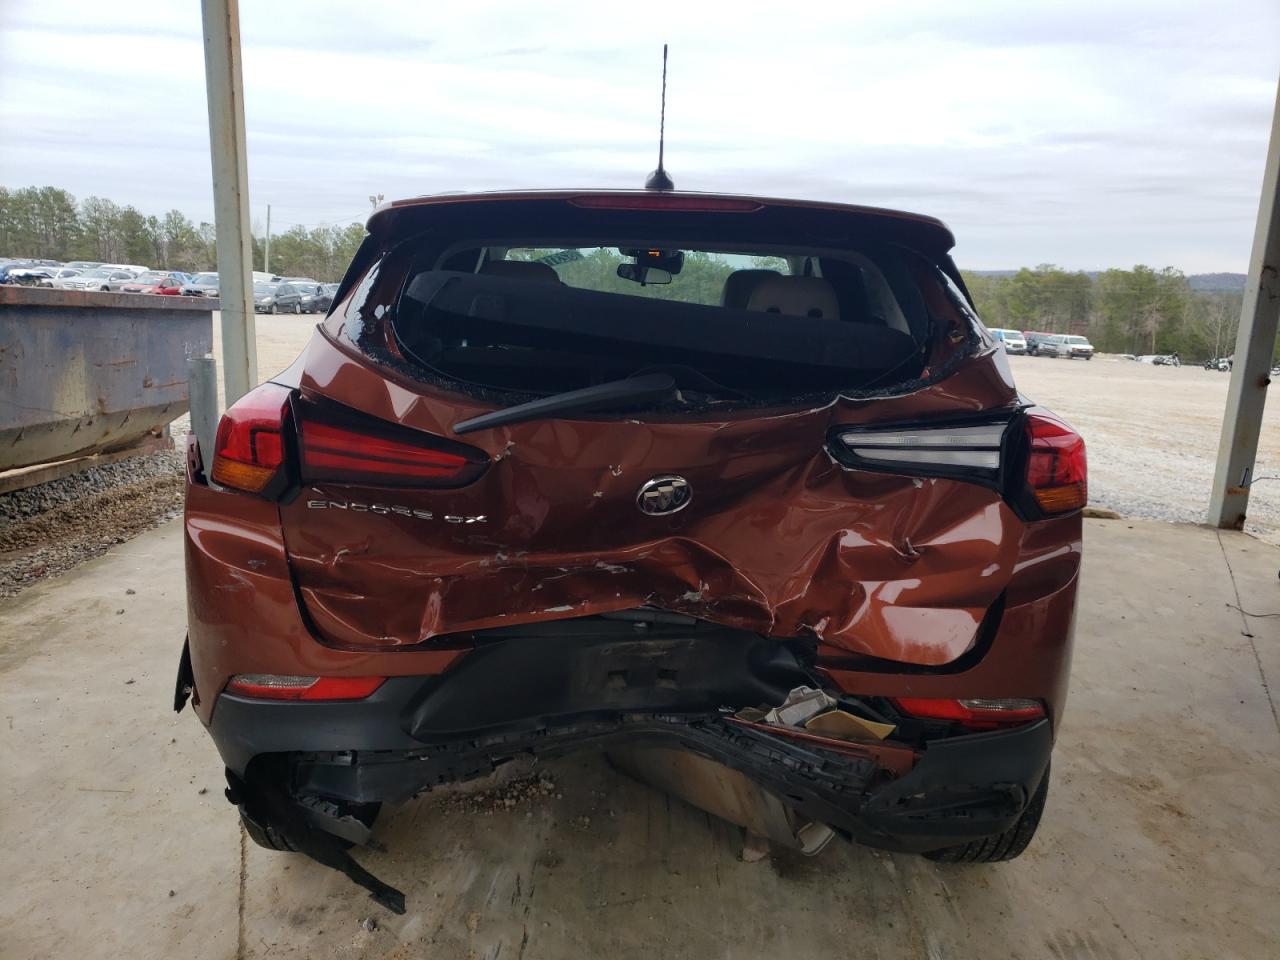 KL4MMBS29LB****** Salvage and Repairable 2020 Buick Encore in Alabama State